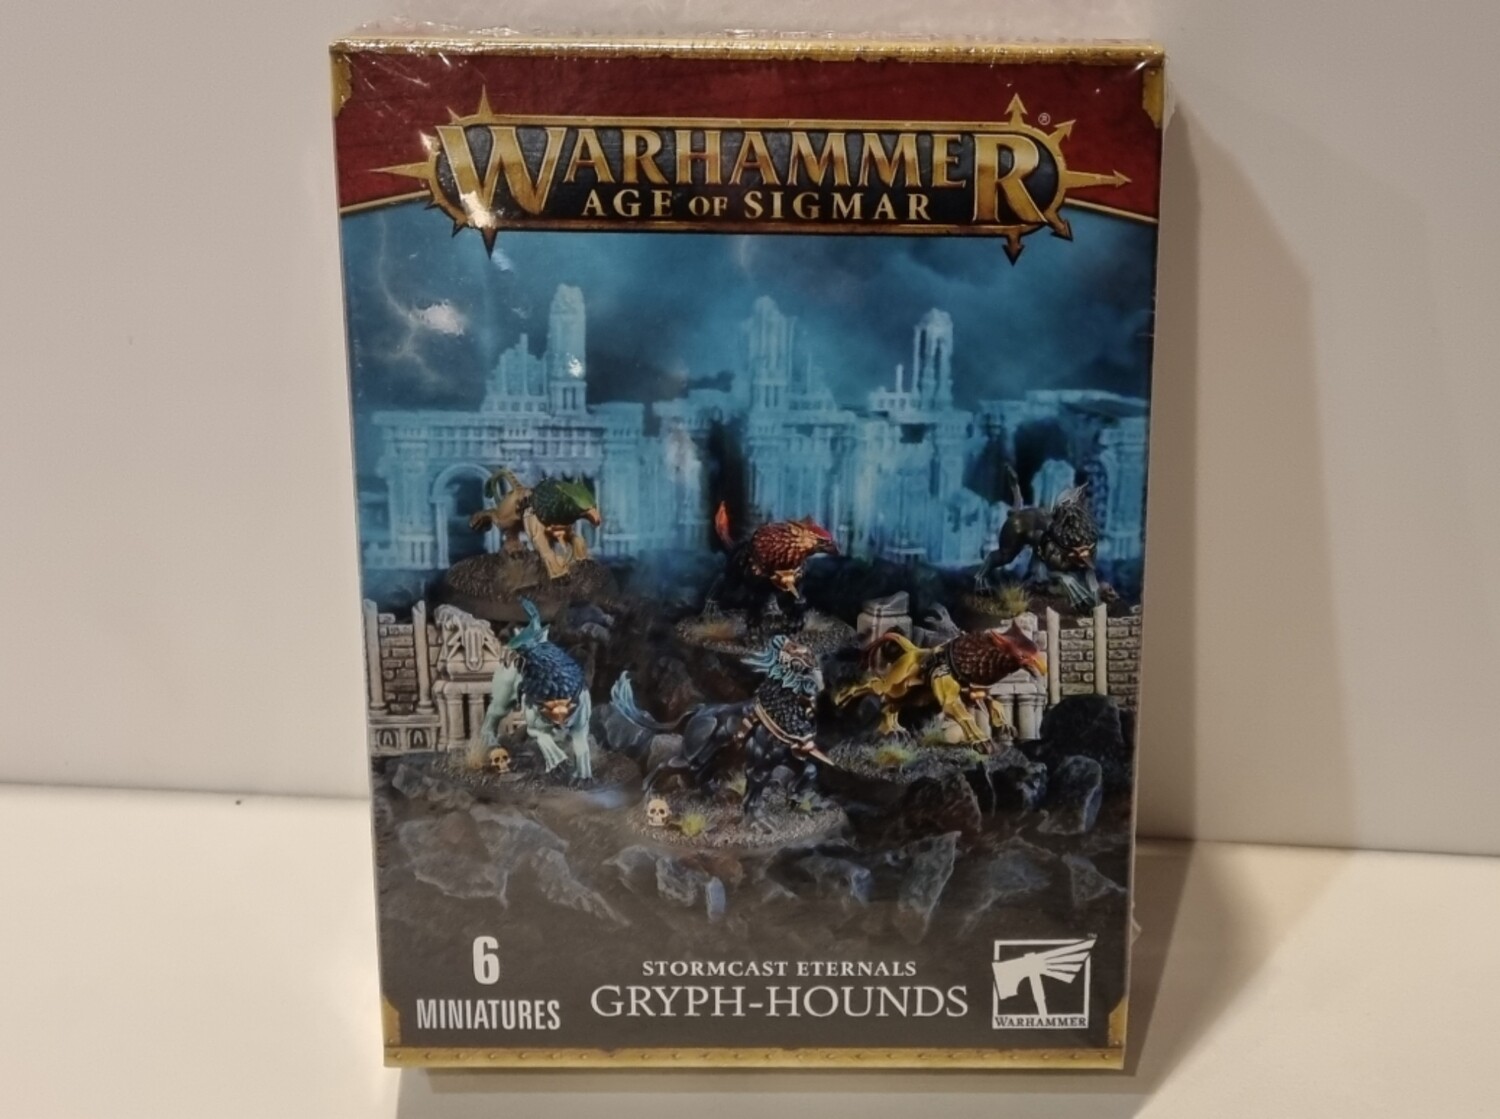 Warhammer, Age of Sigmar, 96-31 (1), Stormcast Eternals: Gryph-Hounds 